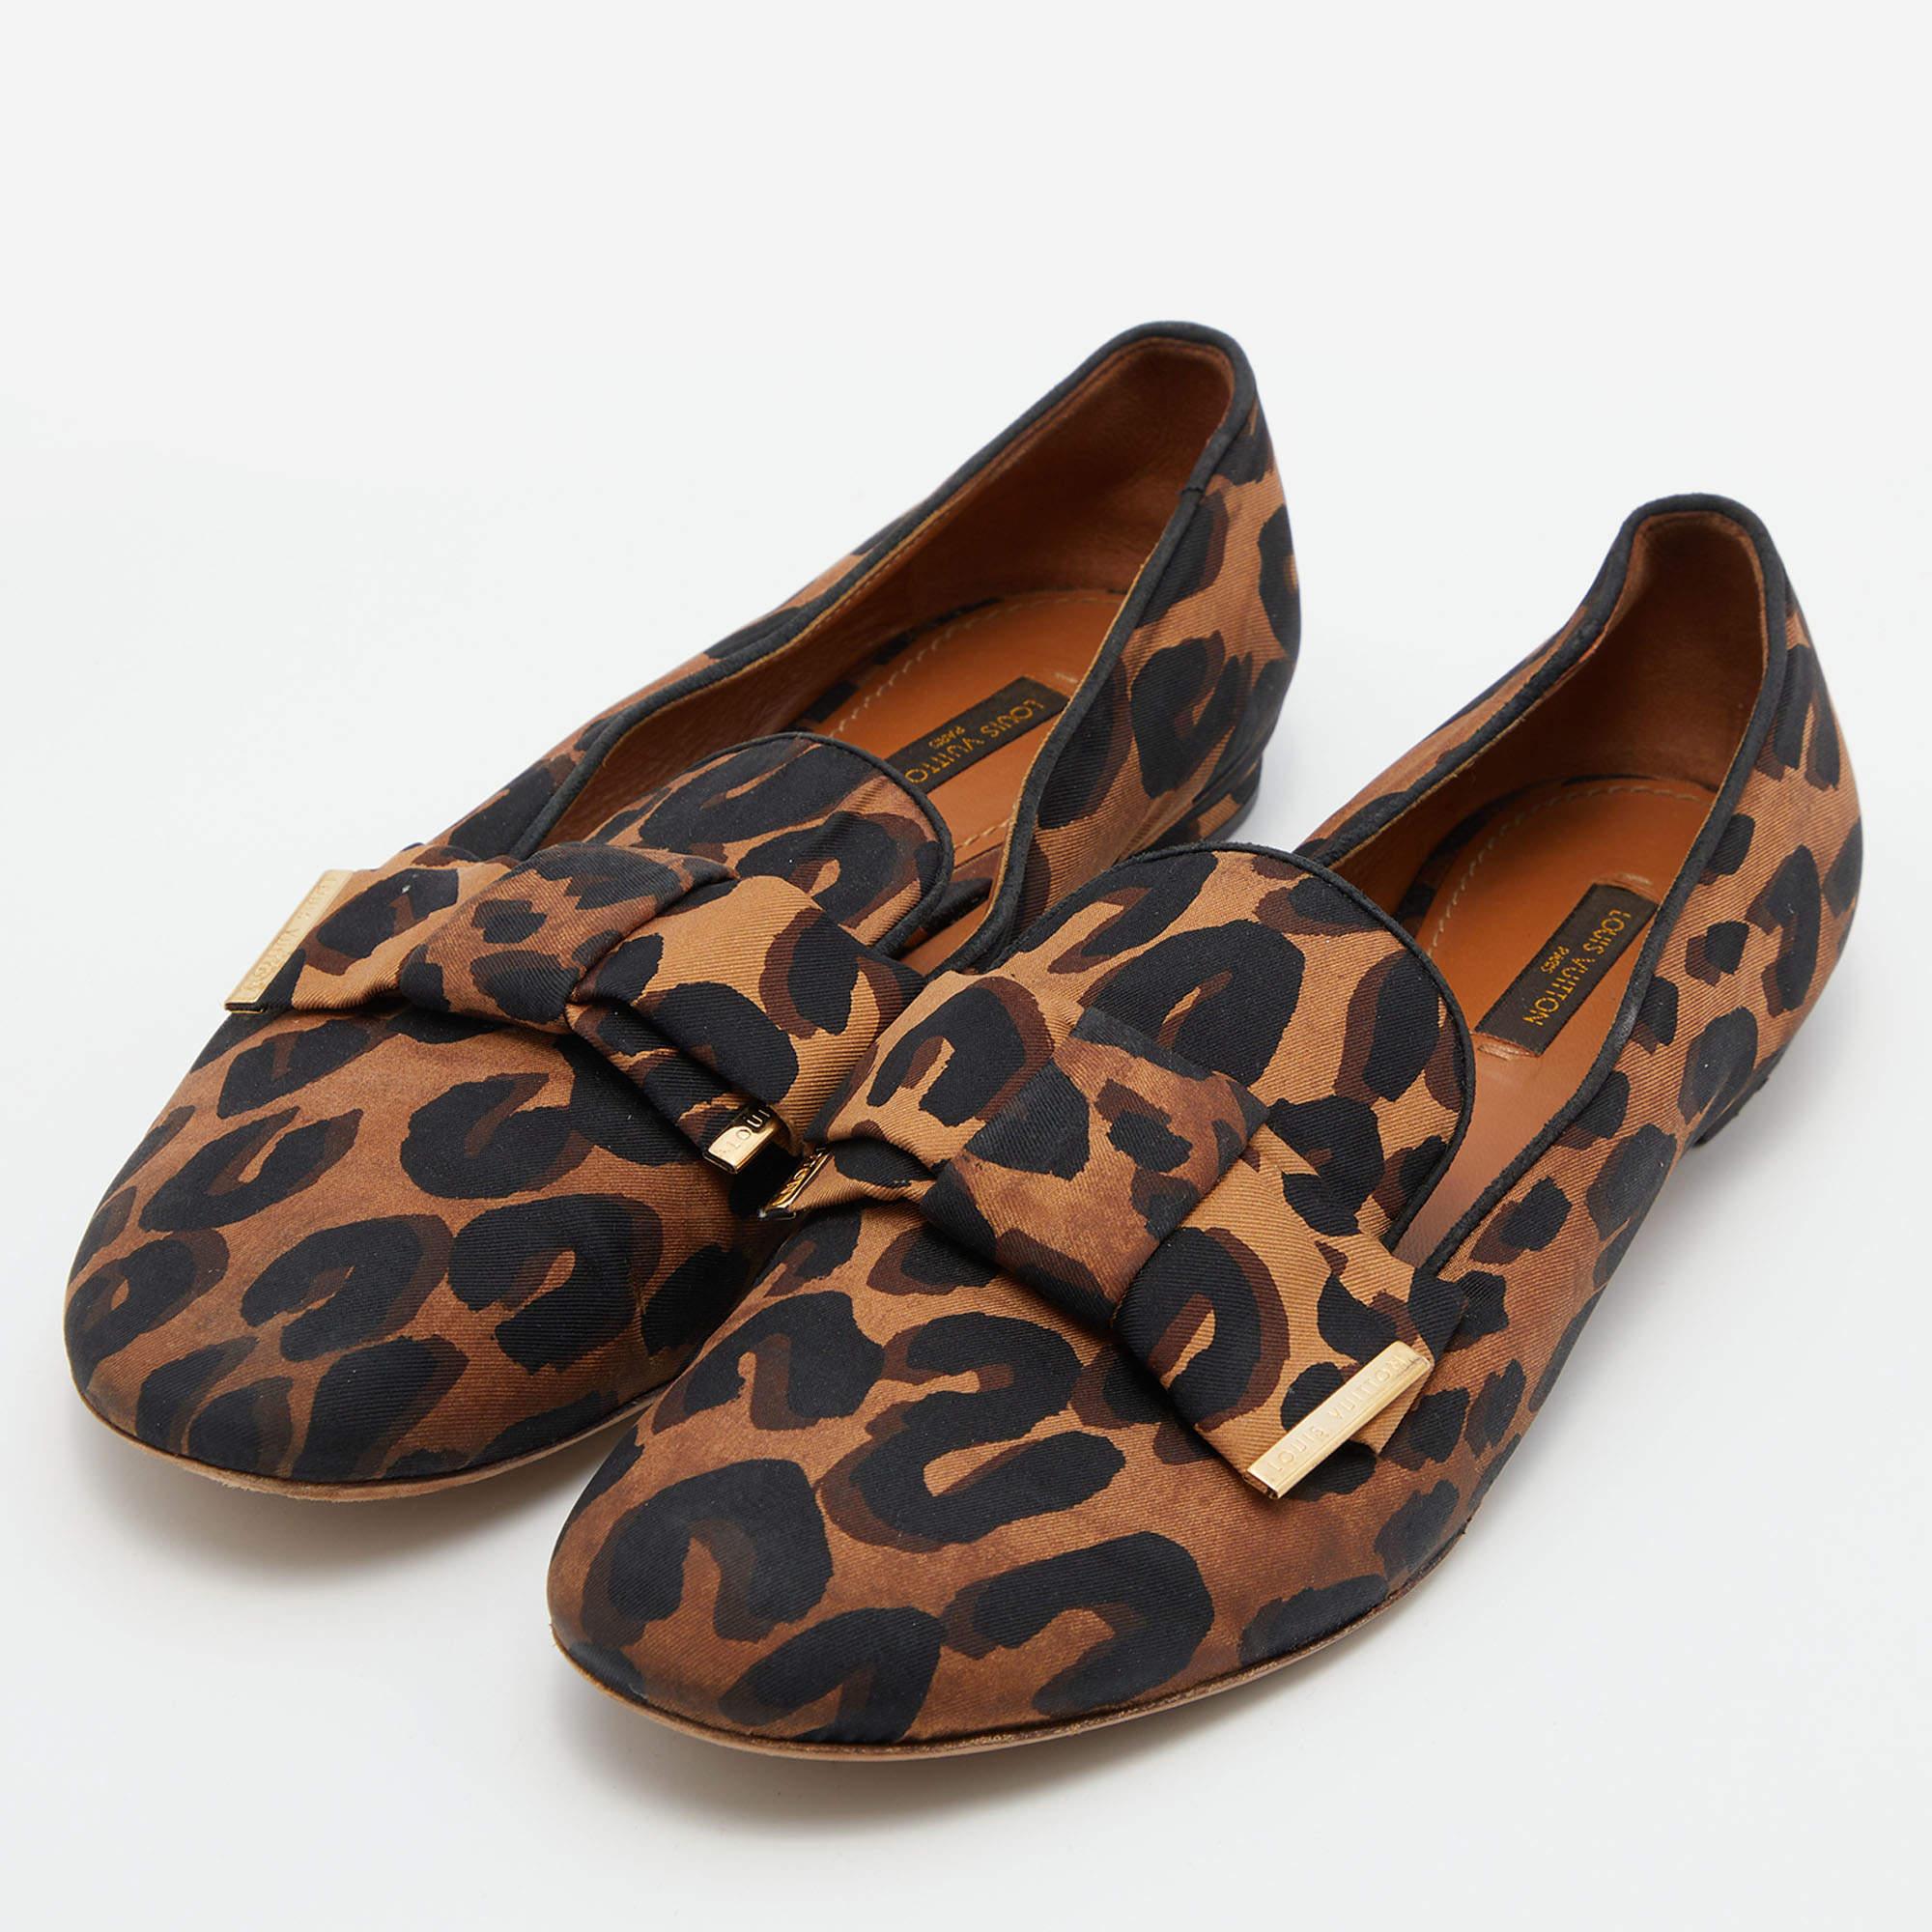 Louis Vuitton Brown Leopard Printed Fabric Bow Detail Smoking Slippers Size 39 1